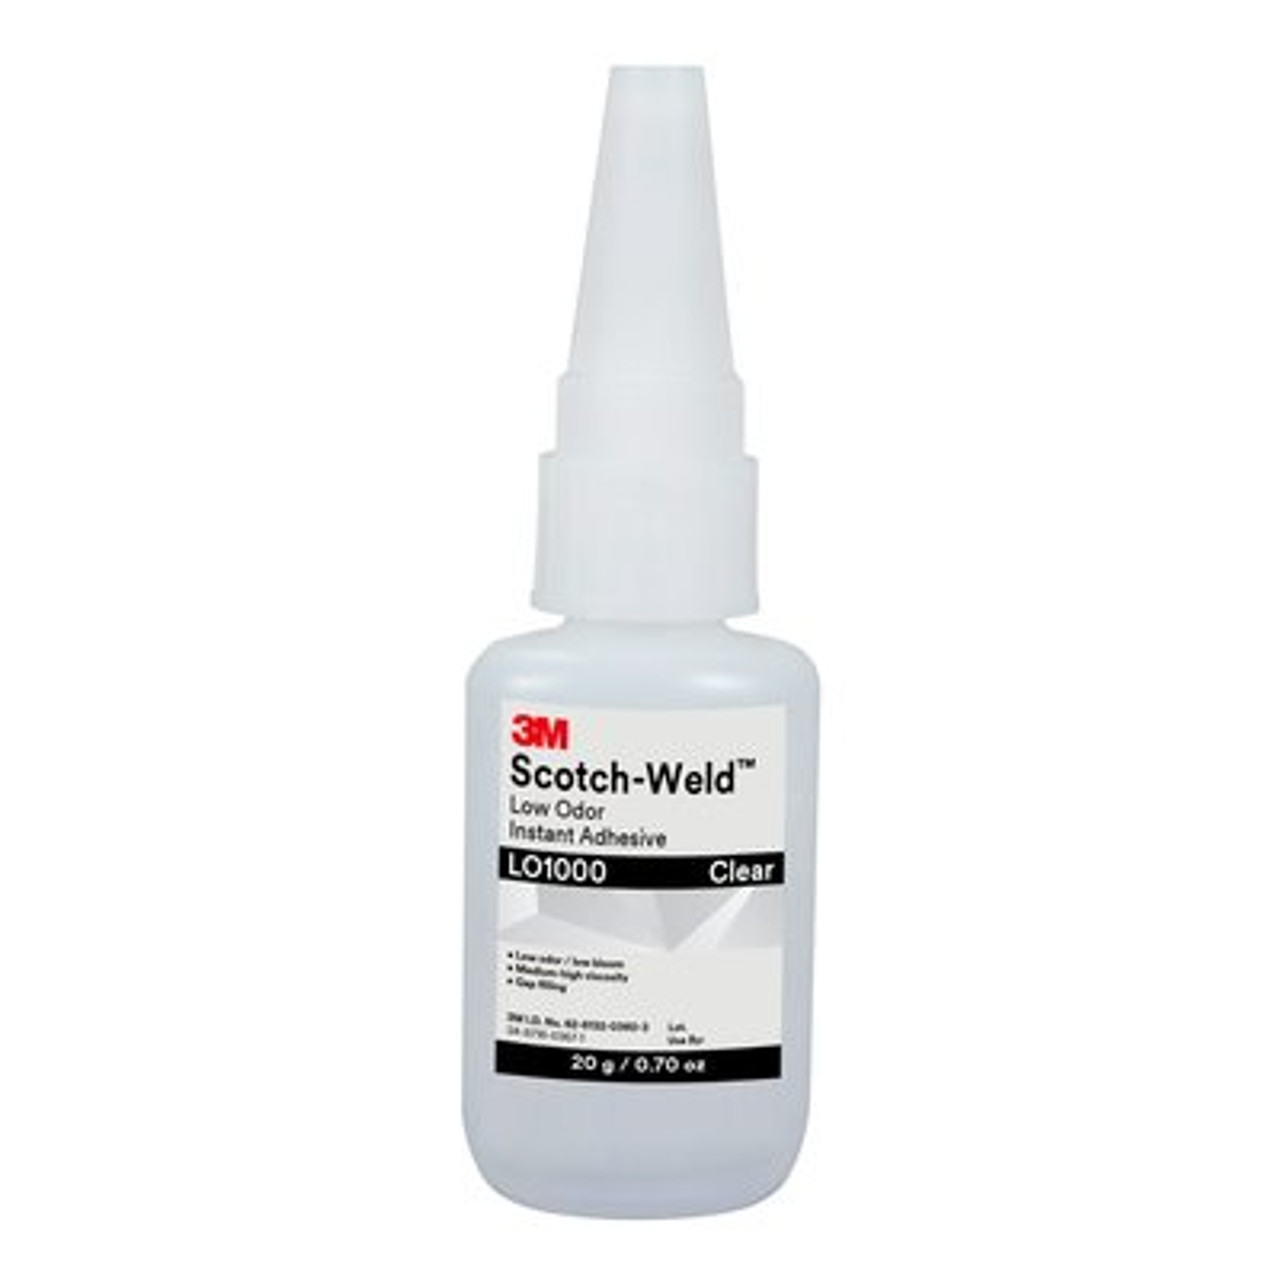 3M™ Scotch-Weld™ Low Odor Instant Adhesive LO1000, Clear, 20 Gram Bottle, 10/case